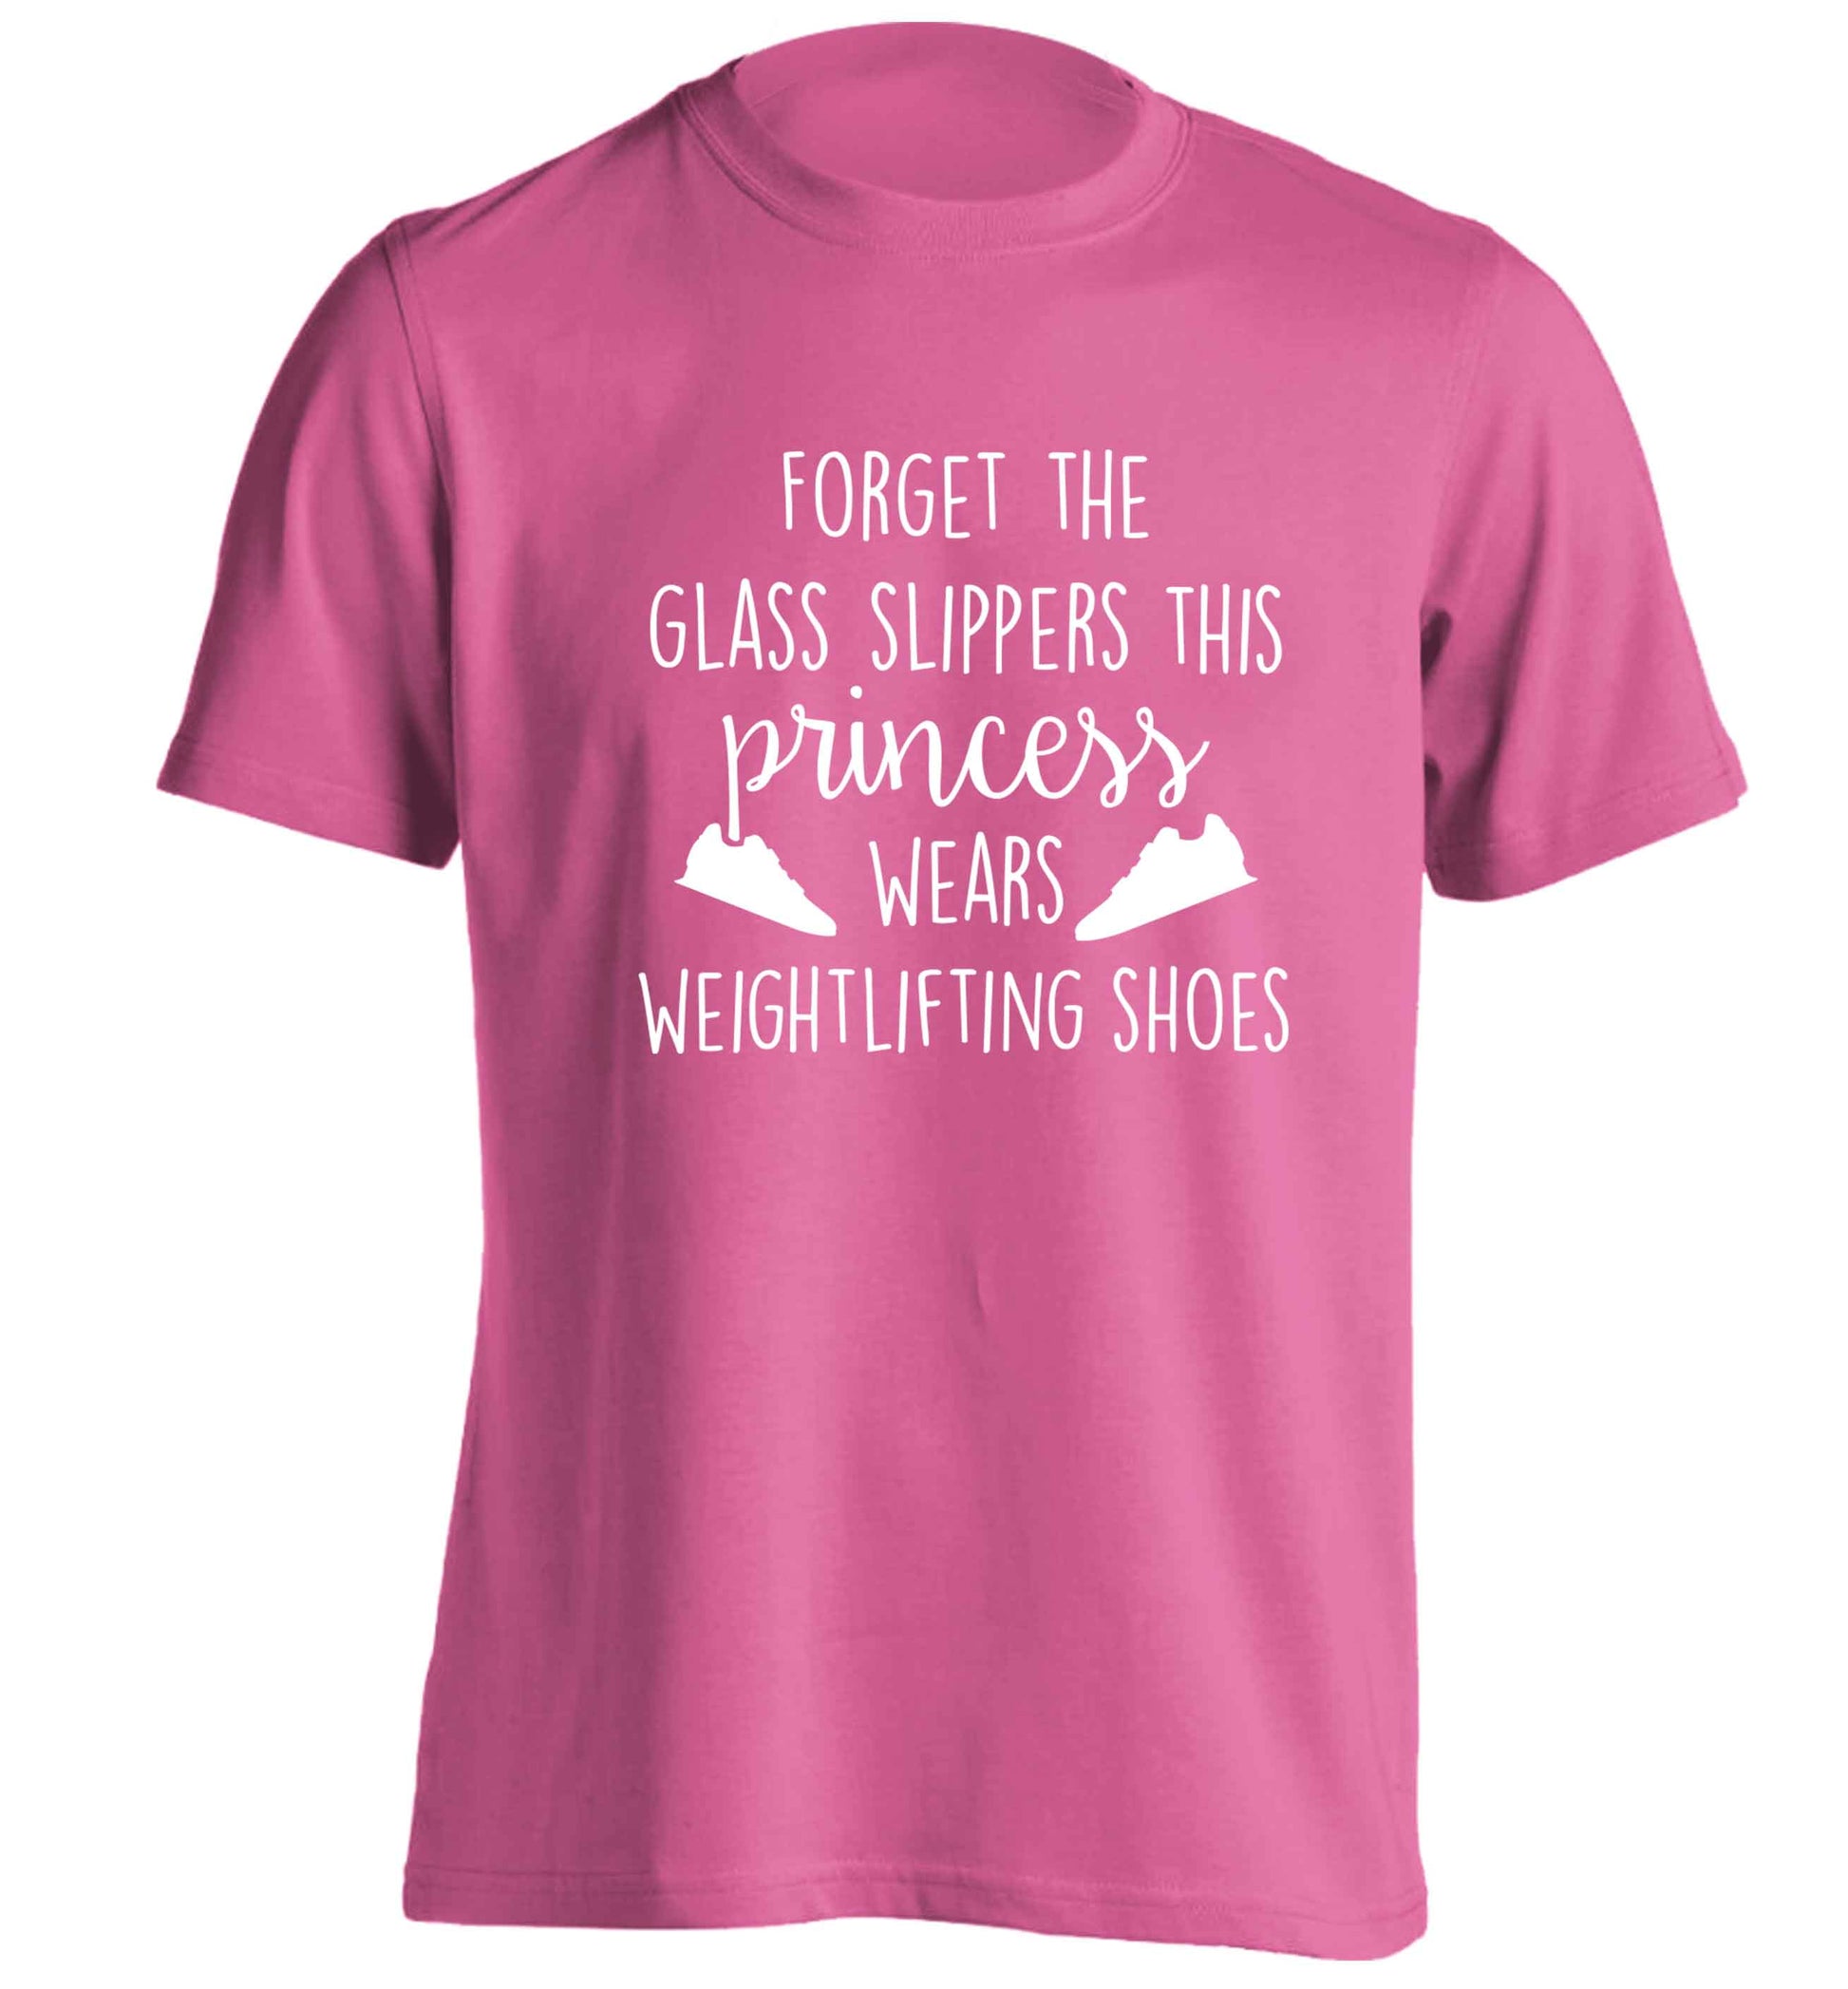 Forget the glass slippers this princess wears weightlifting shoes adults unisex pink Tshirt 2XL